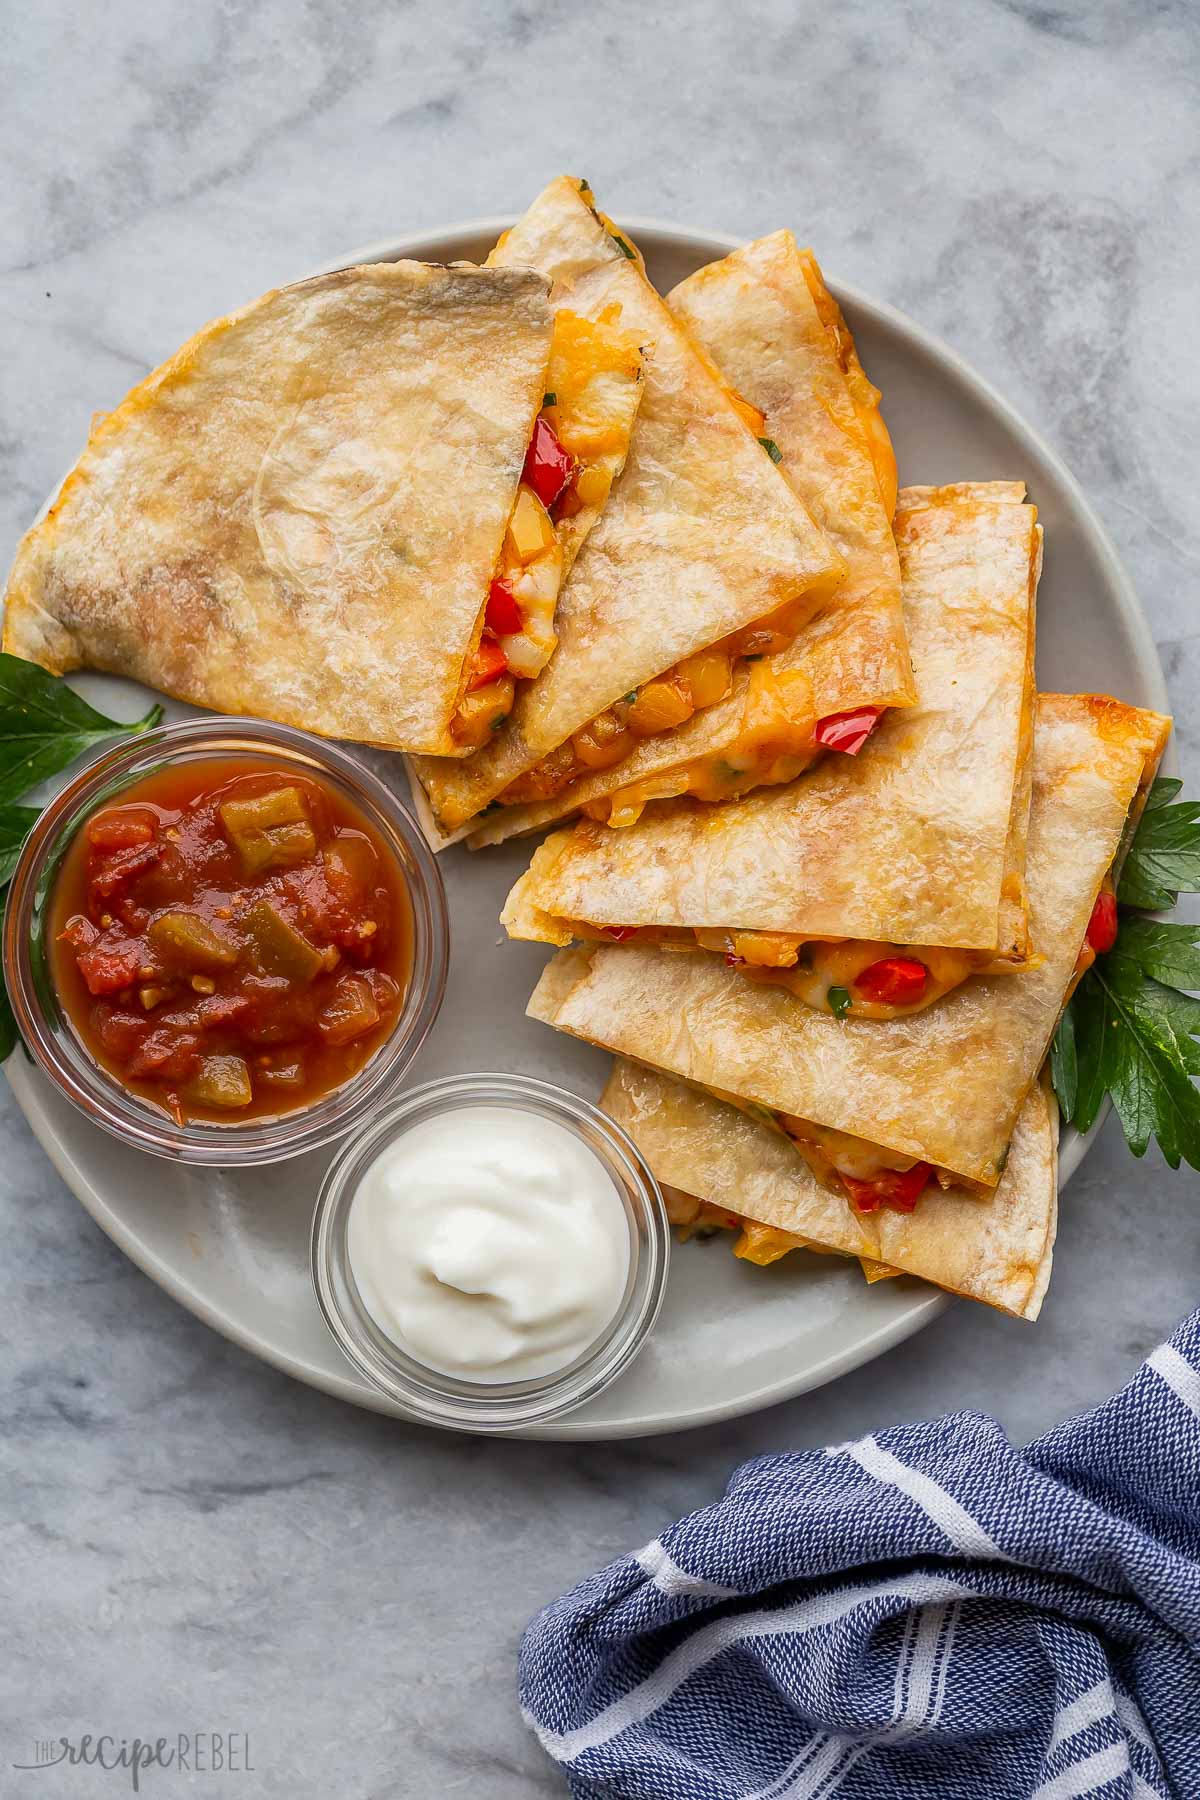 Top view of quesadillas slices on a plate with glass bowls of sour cream and salsa.